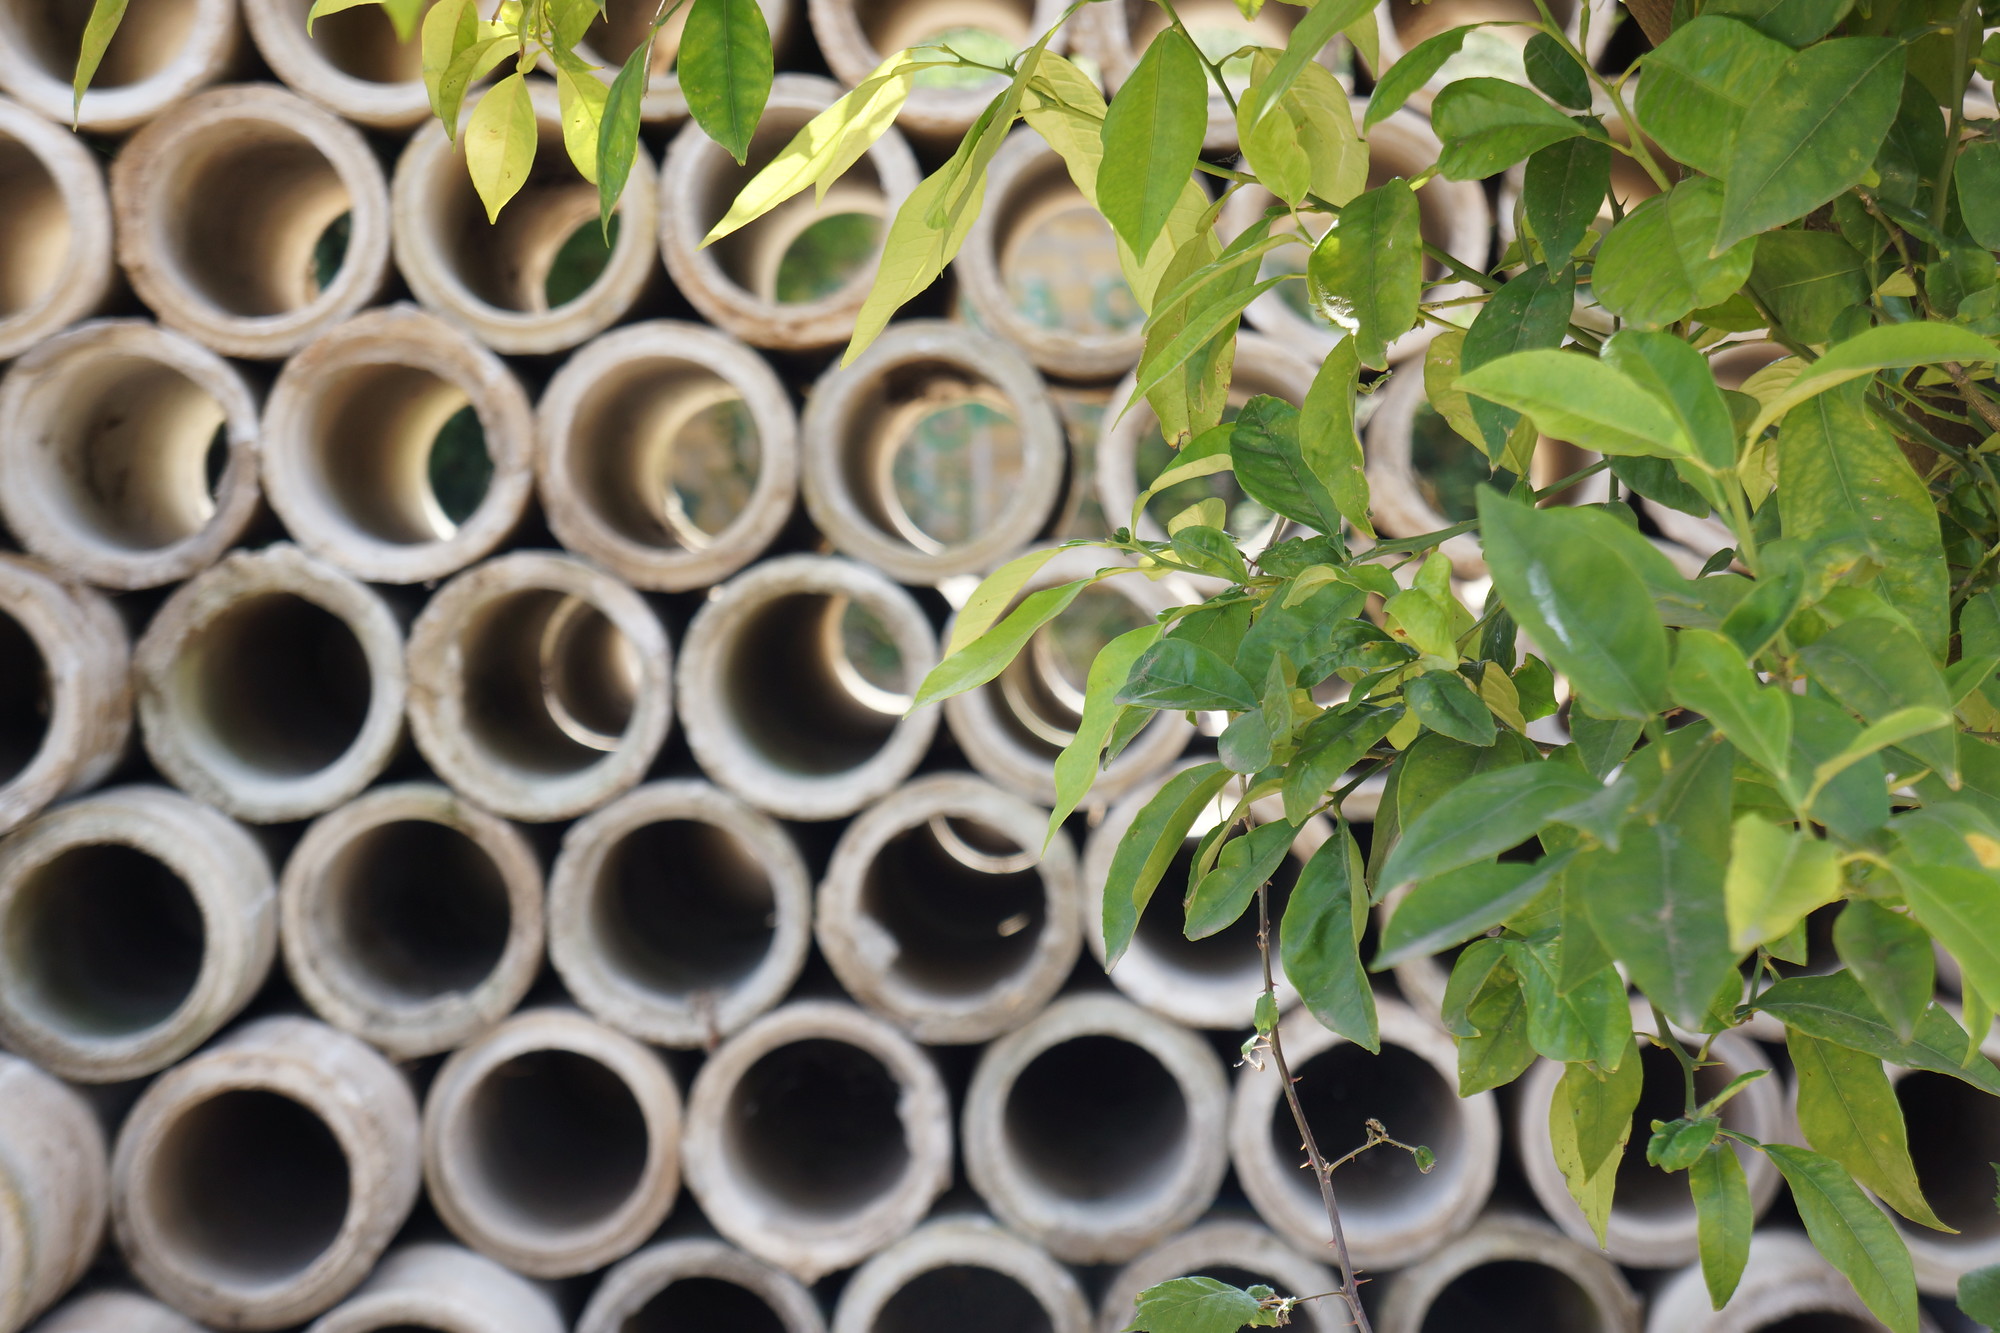 A tuft of green leaves hangs in front of a honeycomb of light gray concrete tubes.